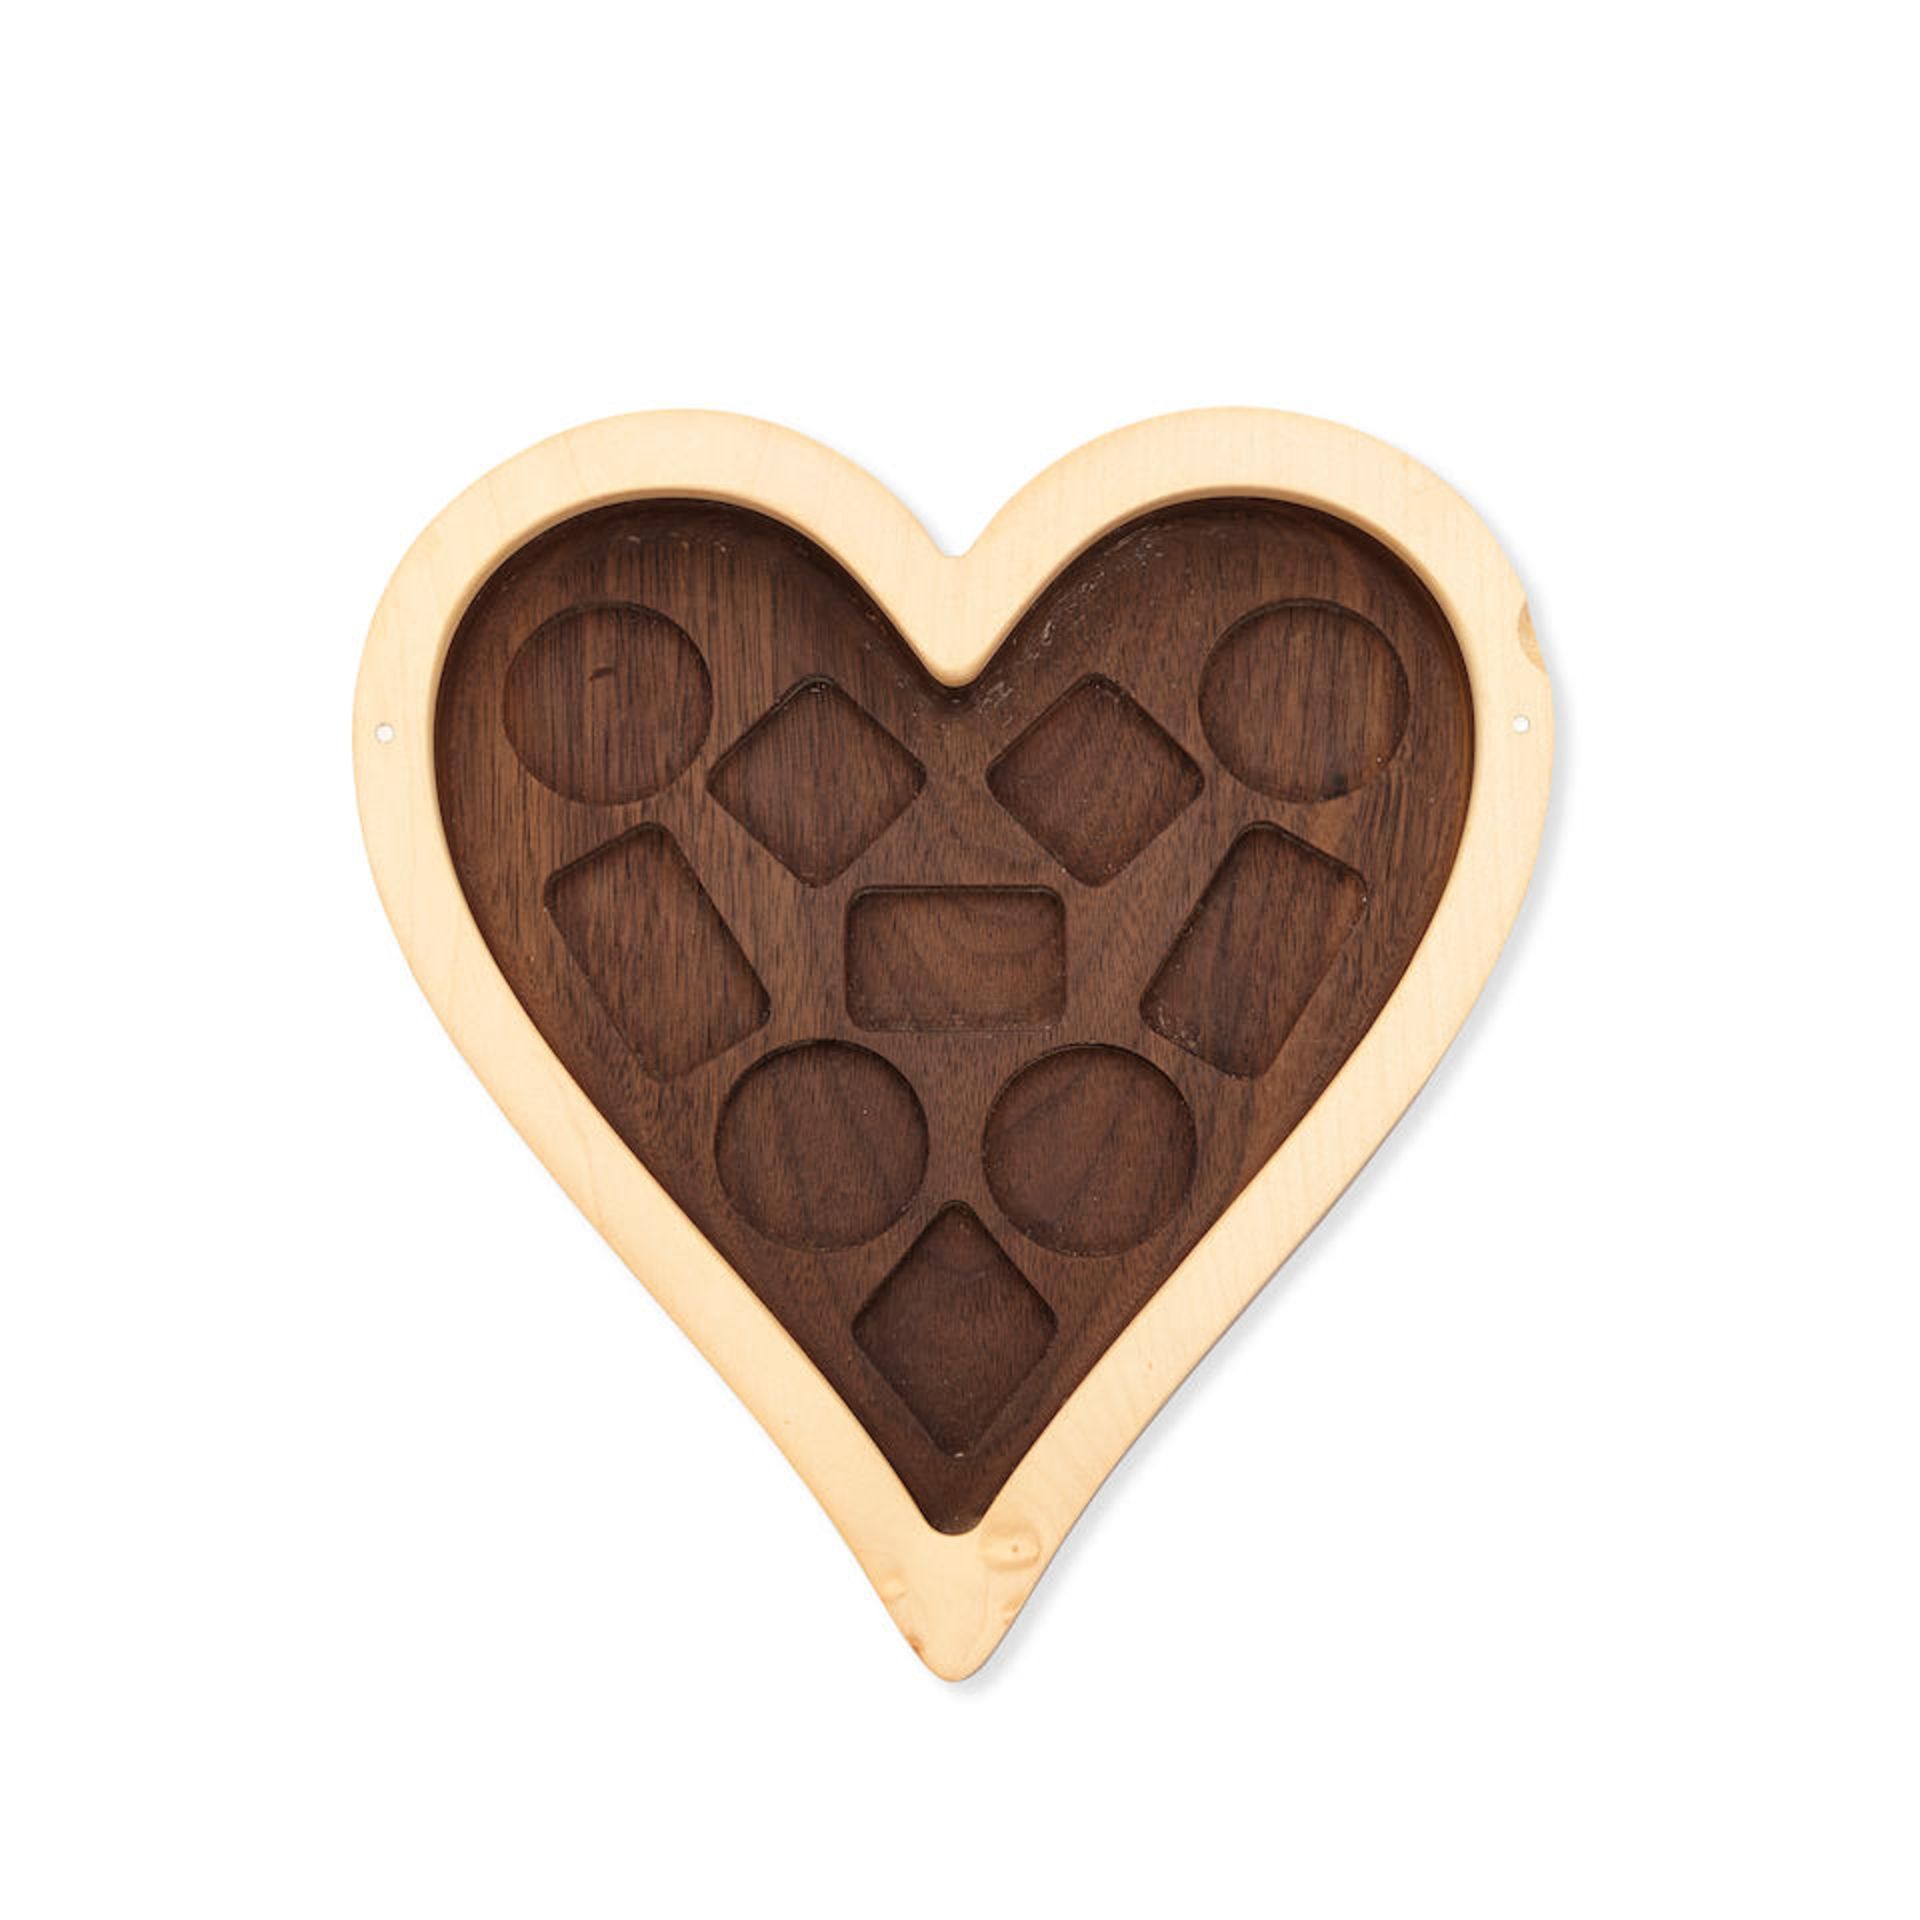 Patek Philippe. A wooden heart shaped chocolate box Circa 2010 - Image 5 of 5